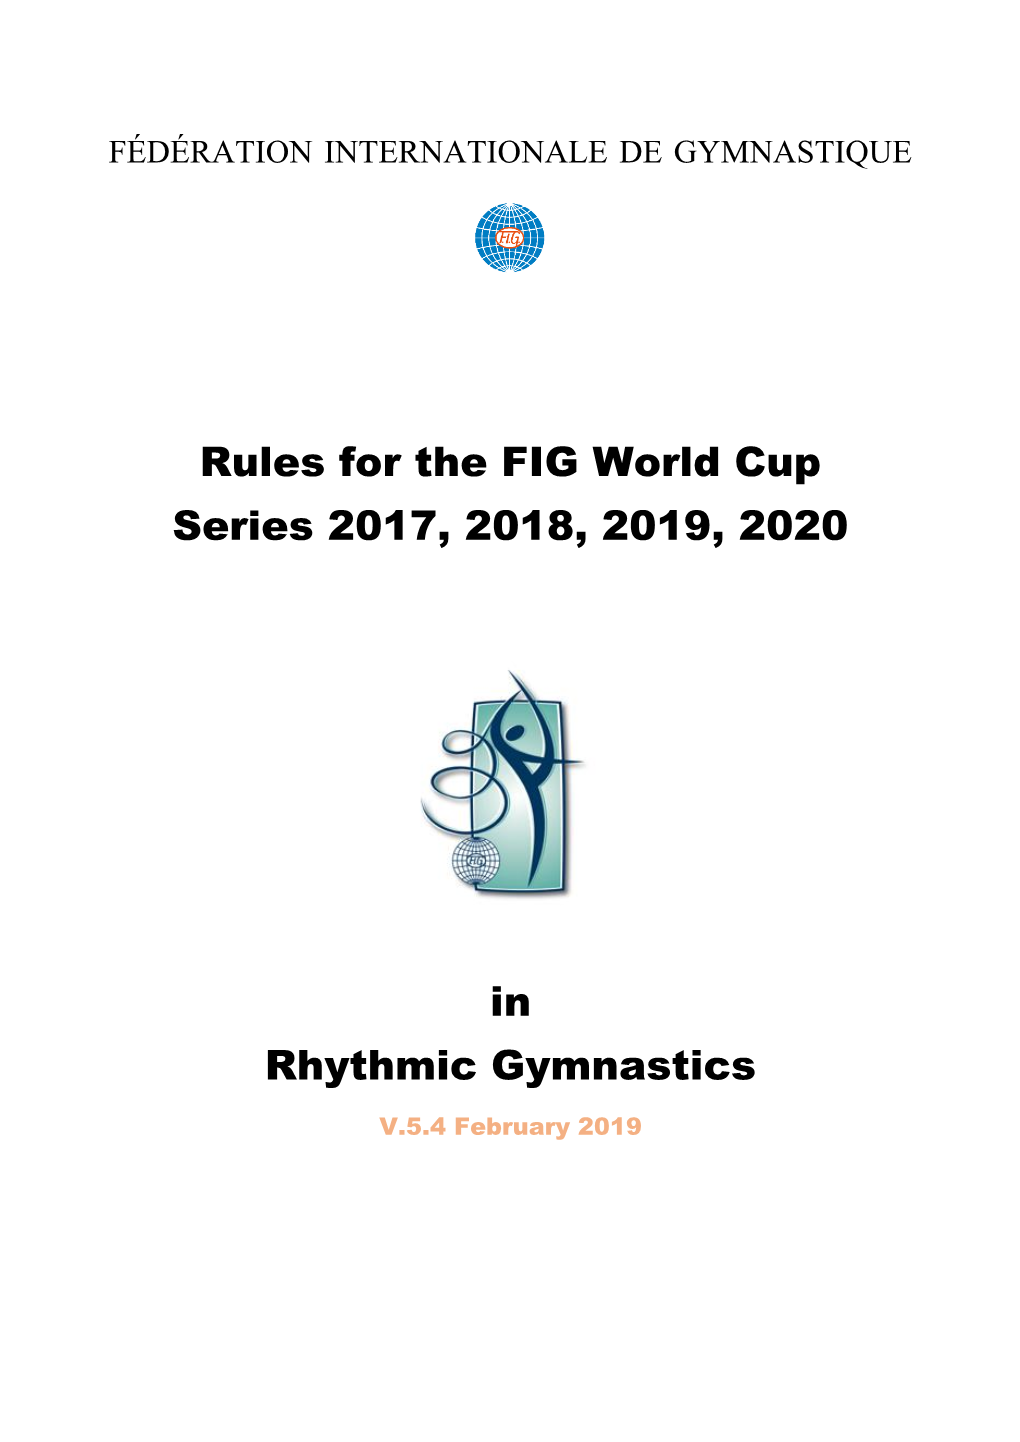 Rules for the FIG World Cup Series 2017, 2018, 2019, 2020 In